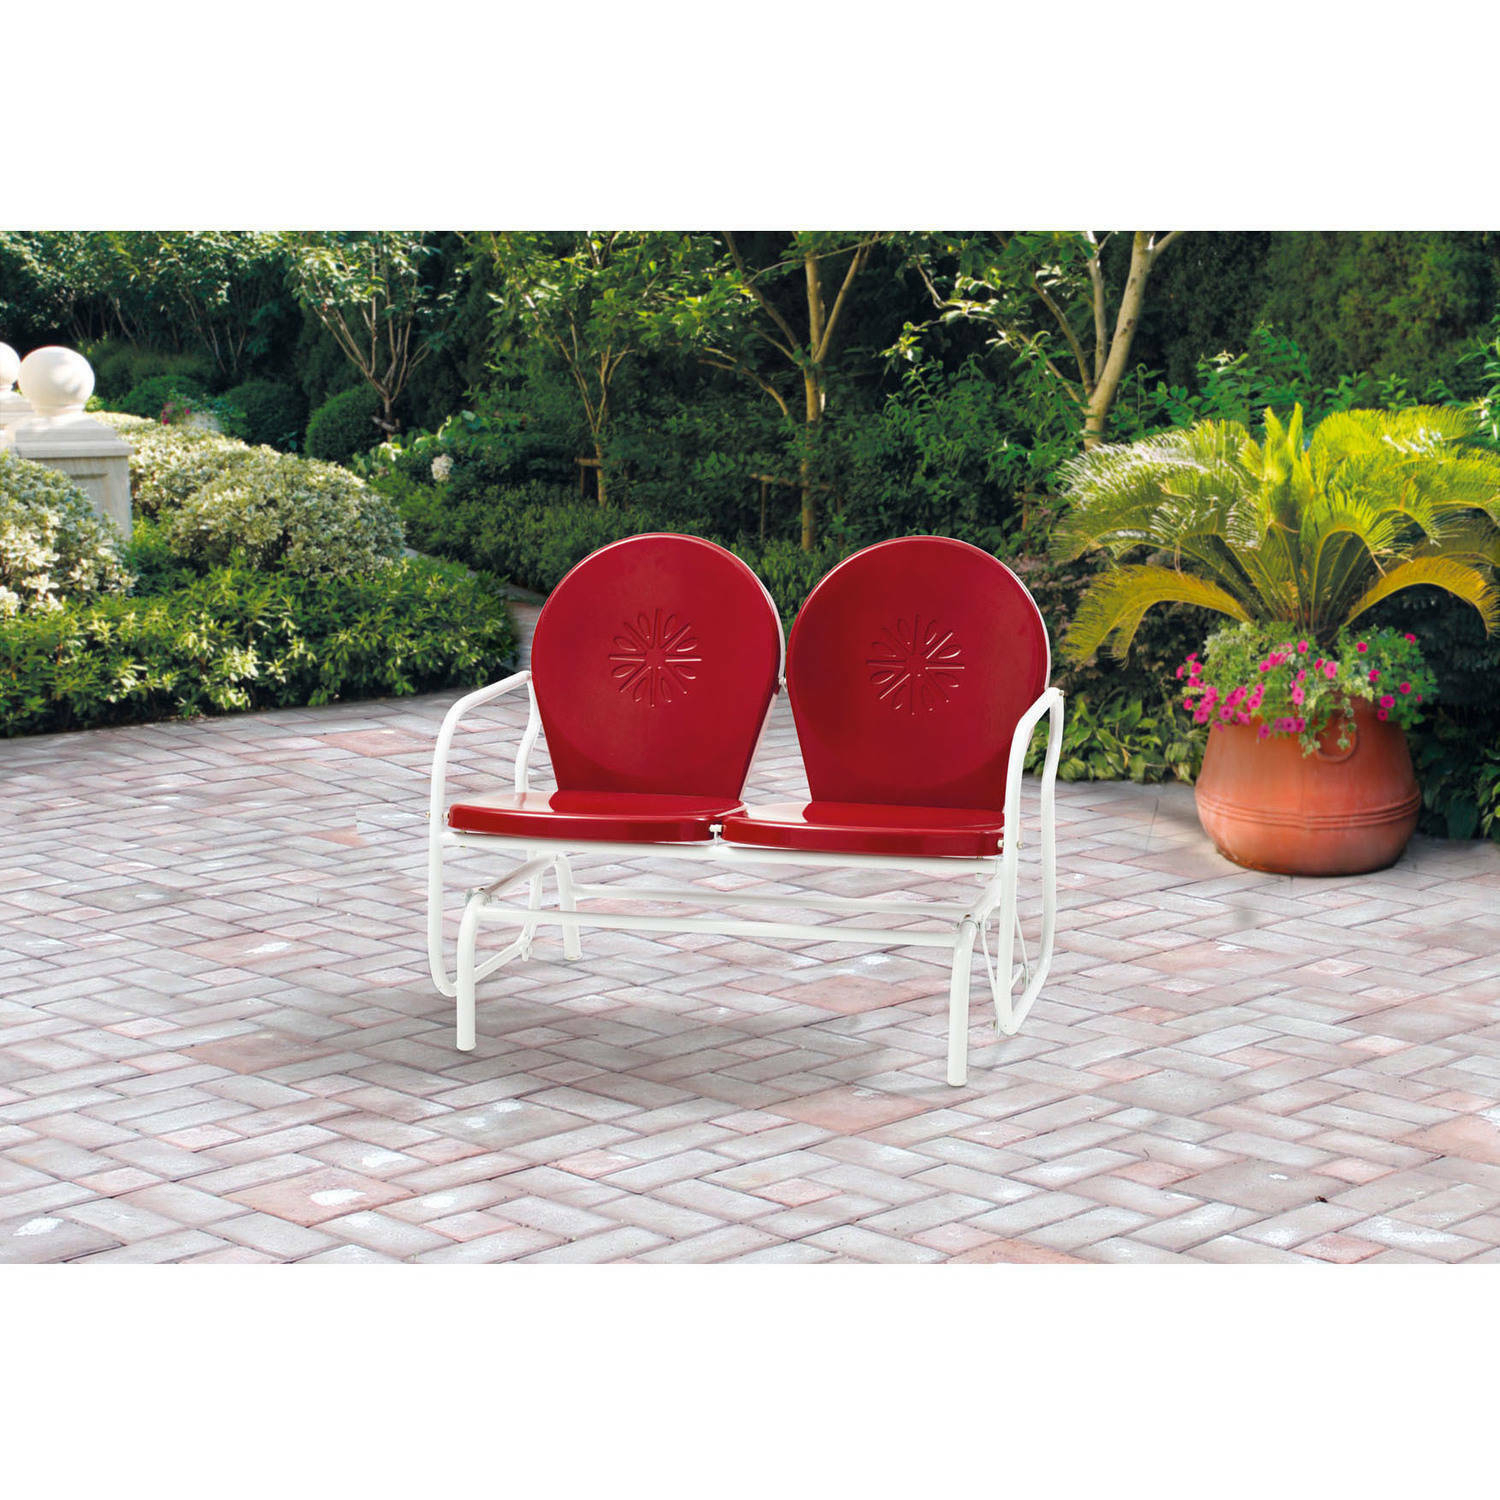 Retro Metal Glider Garden Seating Outdoor Furniture Yard Patio Red Chair Seats 2 inside size 1500 X 1500